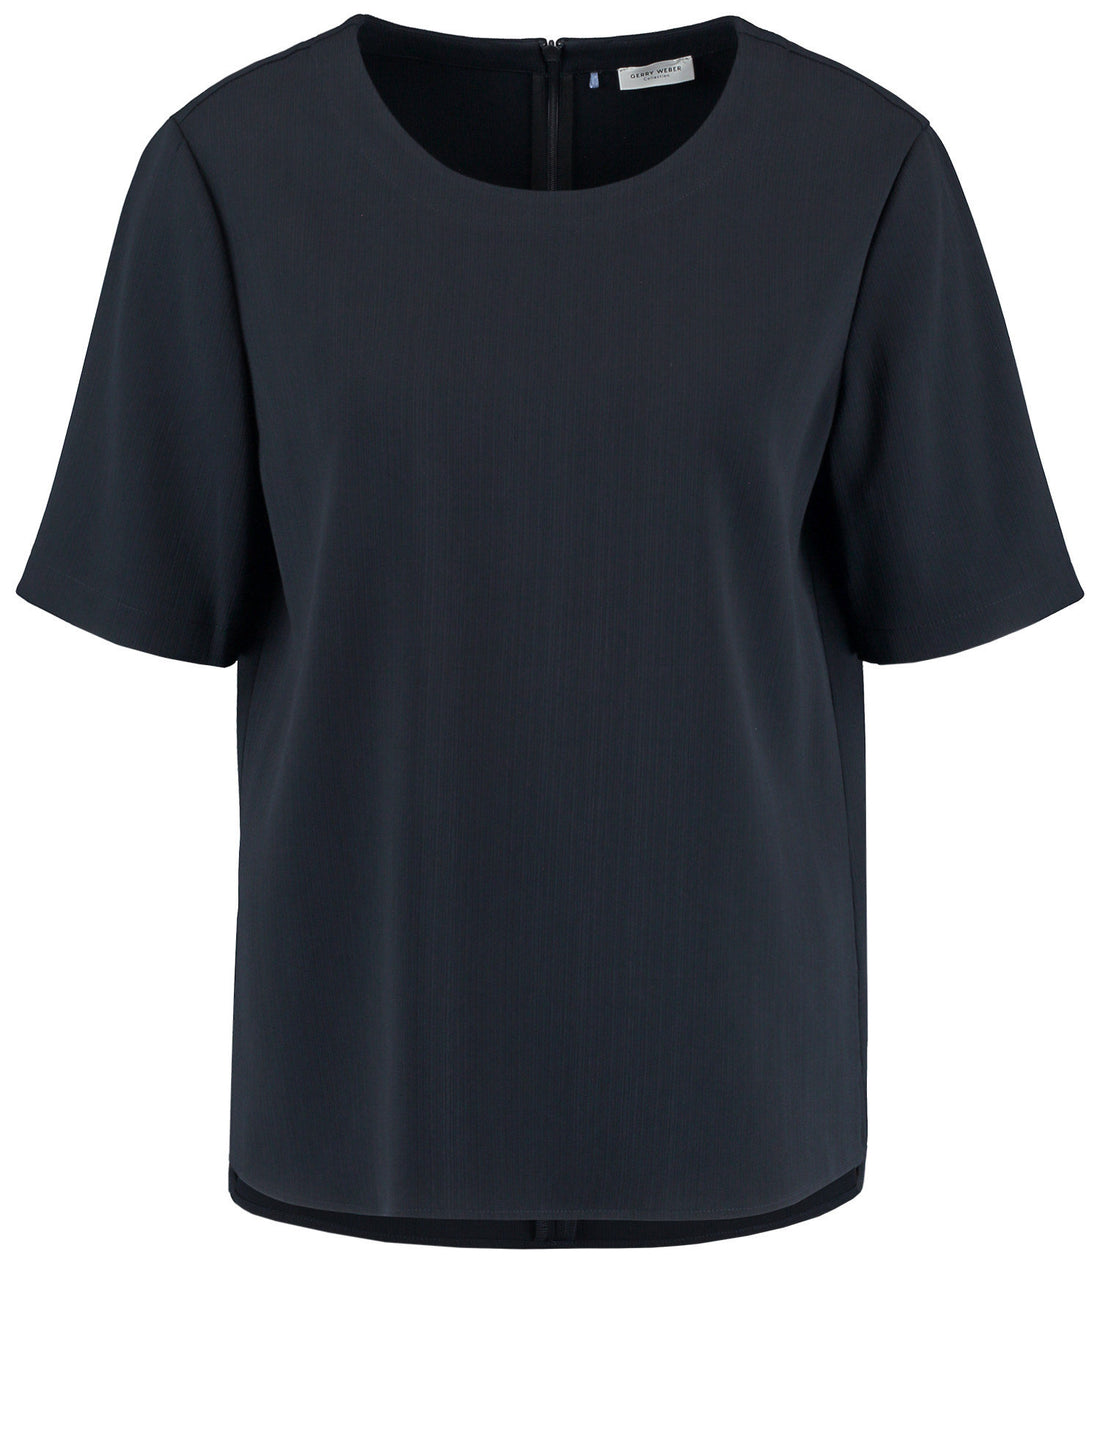 Simple Blouse Top With Fabric Panelling_360010-31250_80890_02